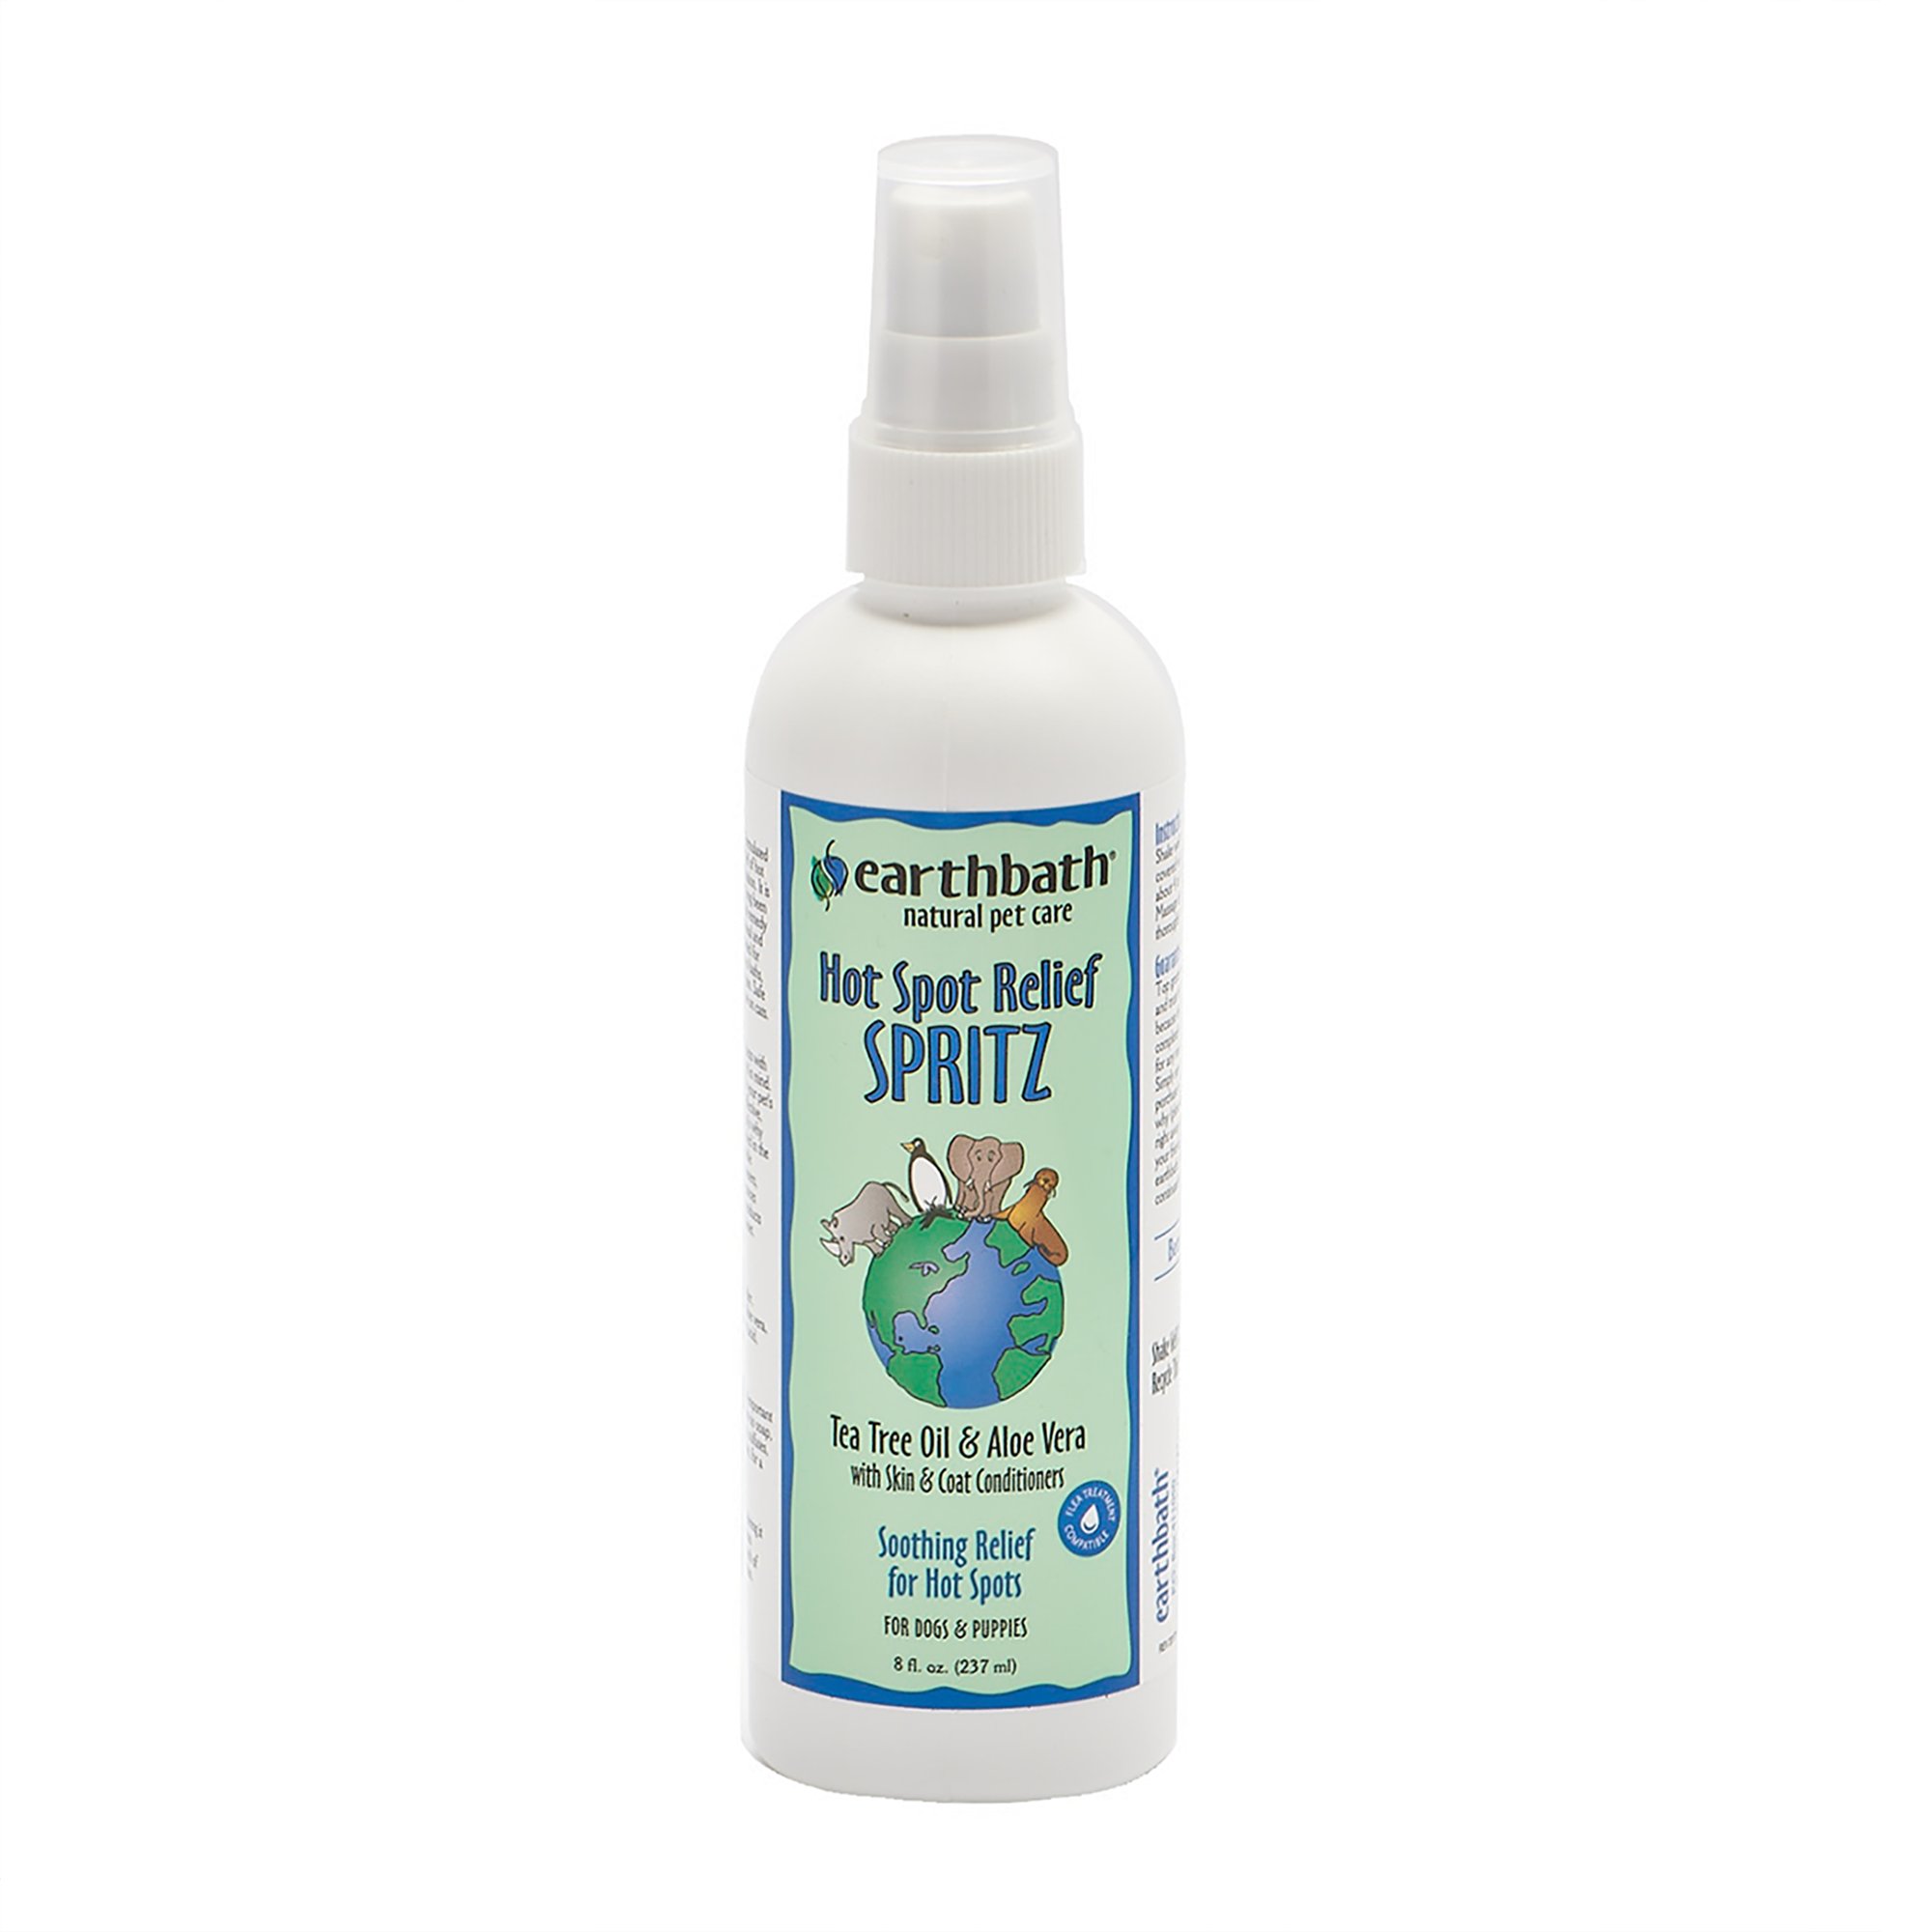 Earthbath Hot Spot & Itch Relief Spray for Dogs Petco